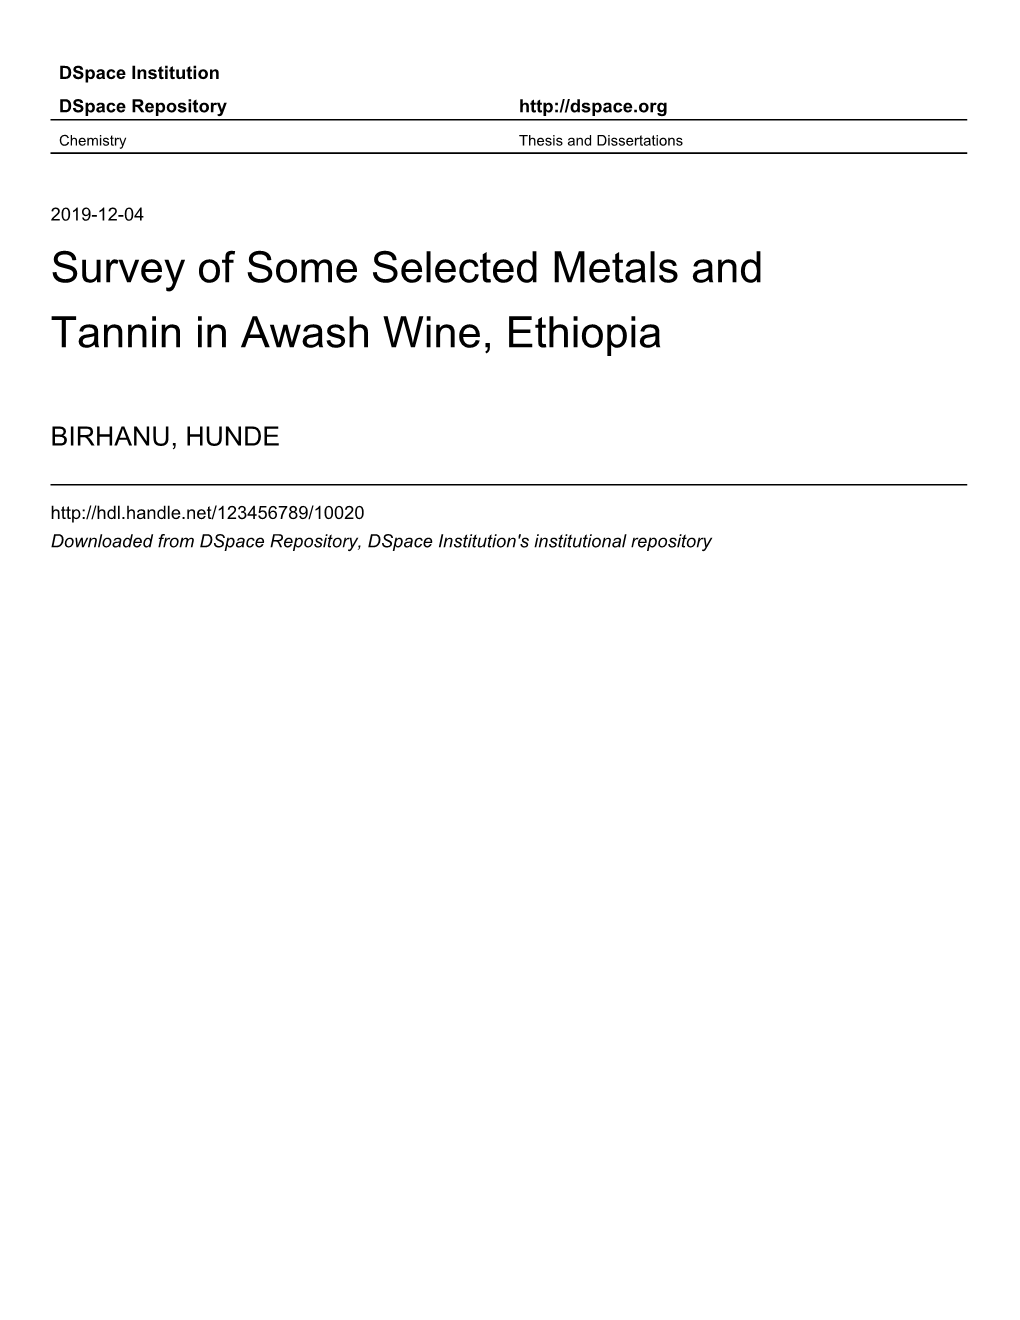 Survey of Some Selected Metals and Tannin in Awash Wine, Ethiopia